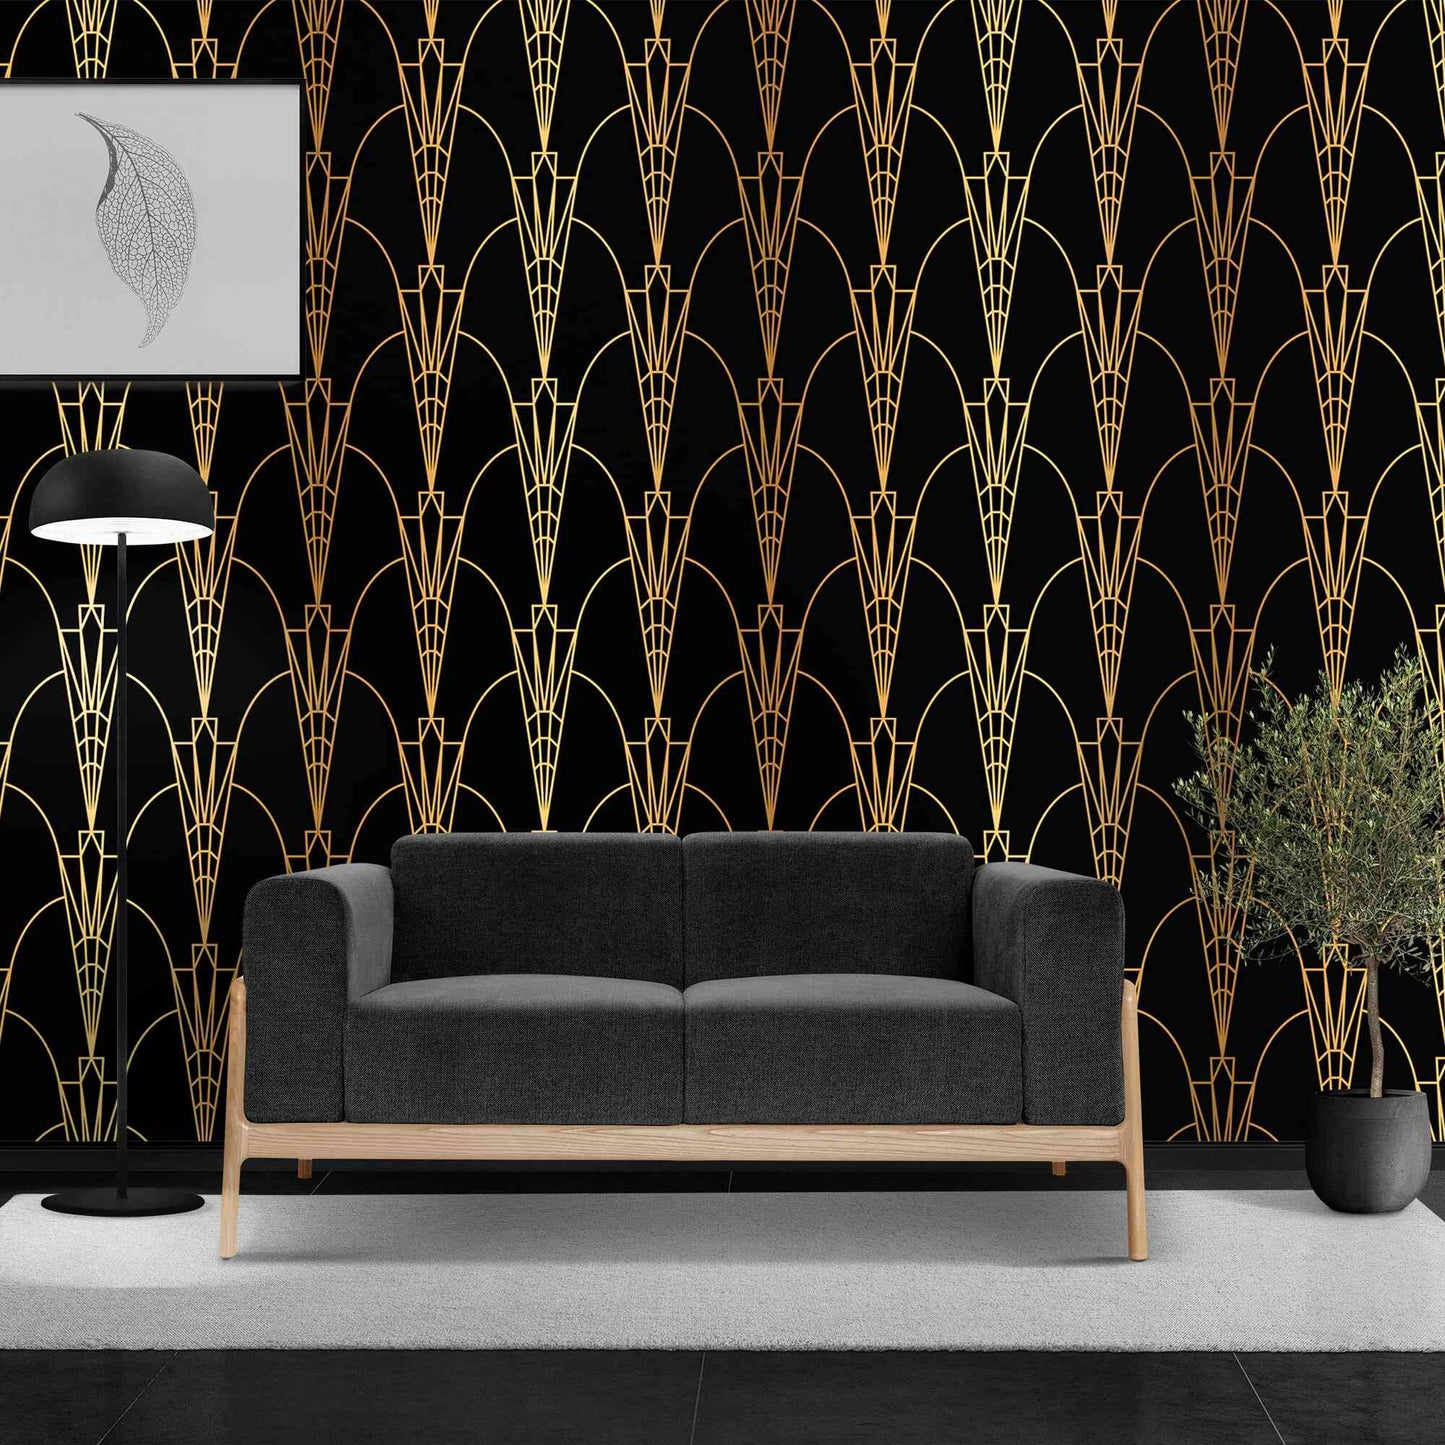 Luxury living room wallpaper enhancing the elegance and sophistication of your living space.